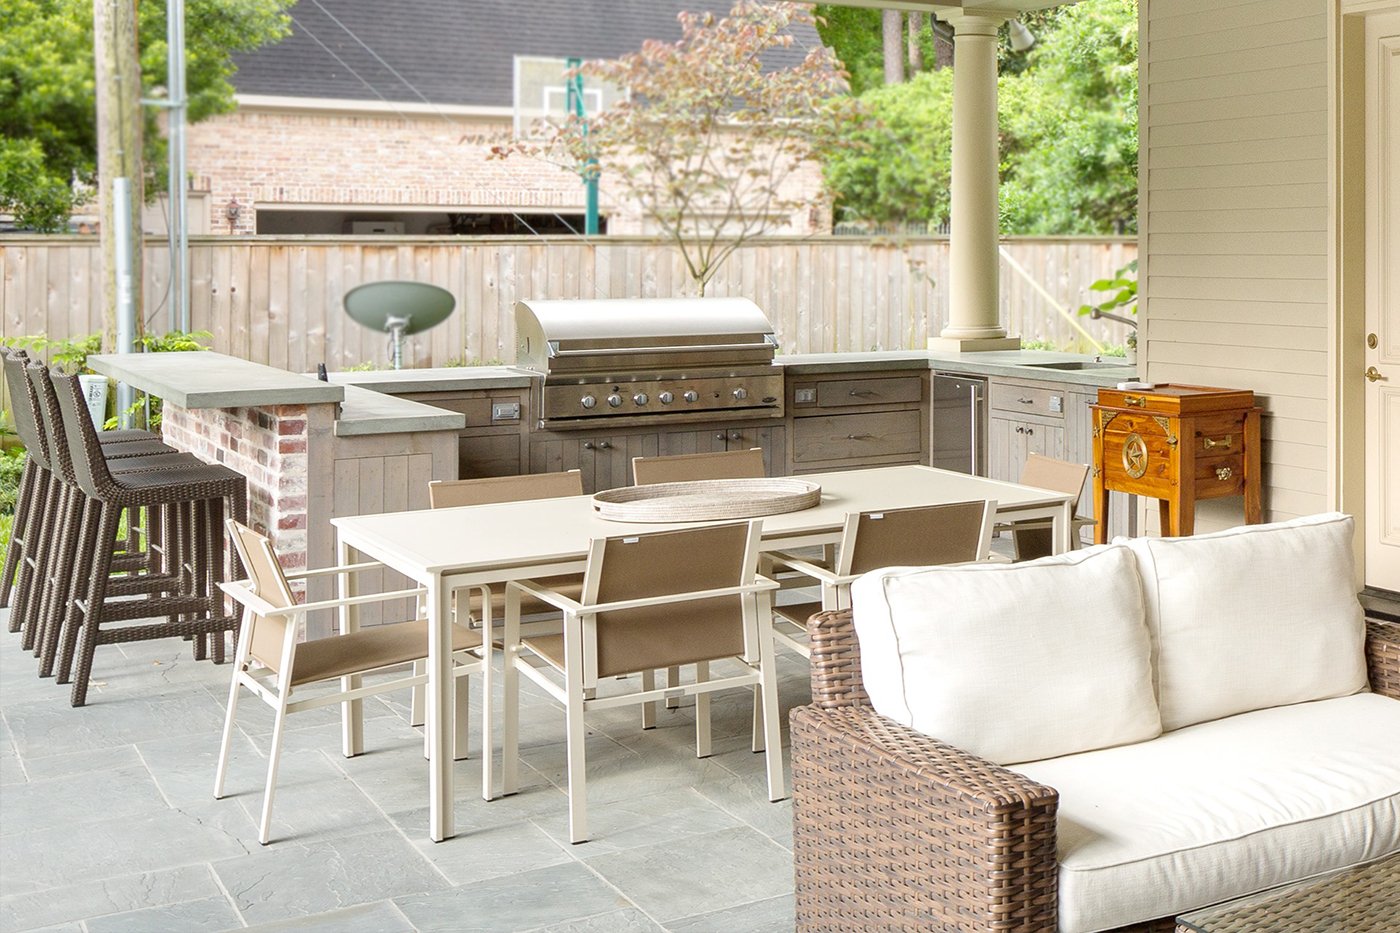 8 Mistakes to Avoid When Planning Your Outdoor Kitchen